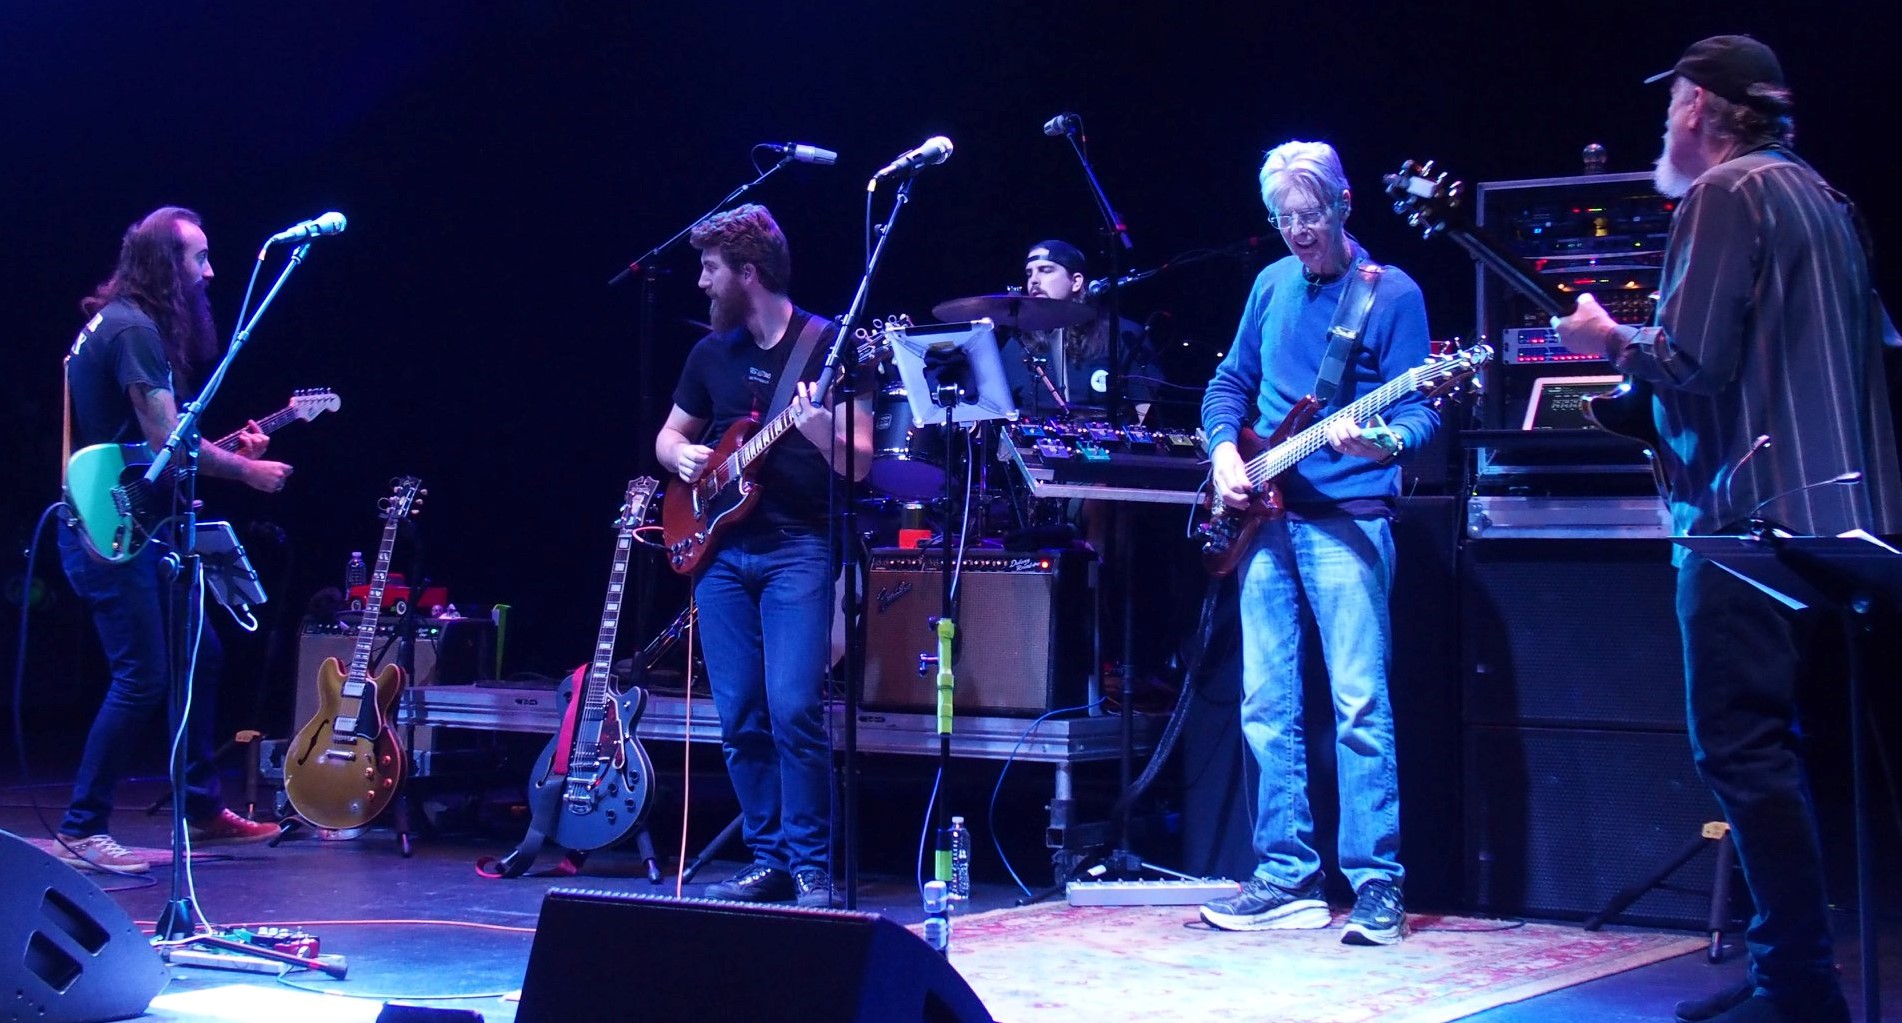 Phil Lesh and the Terrapin Family Band with special guest John Scofield